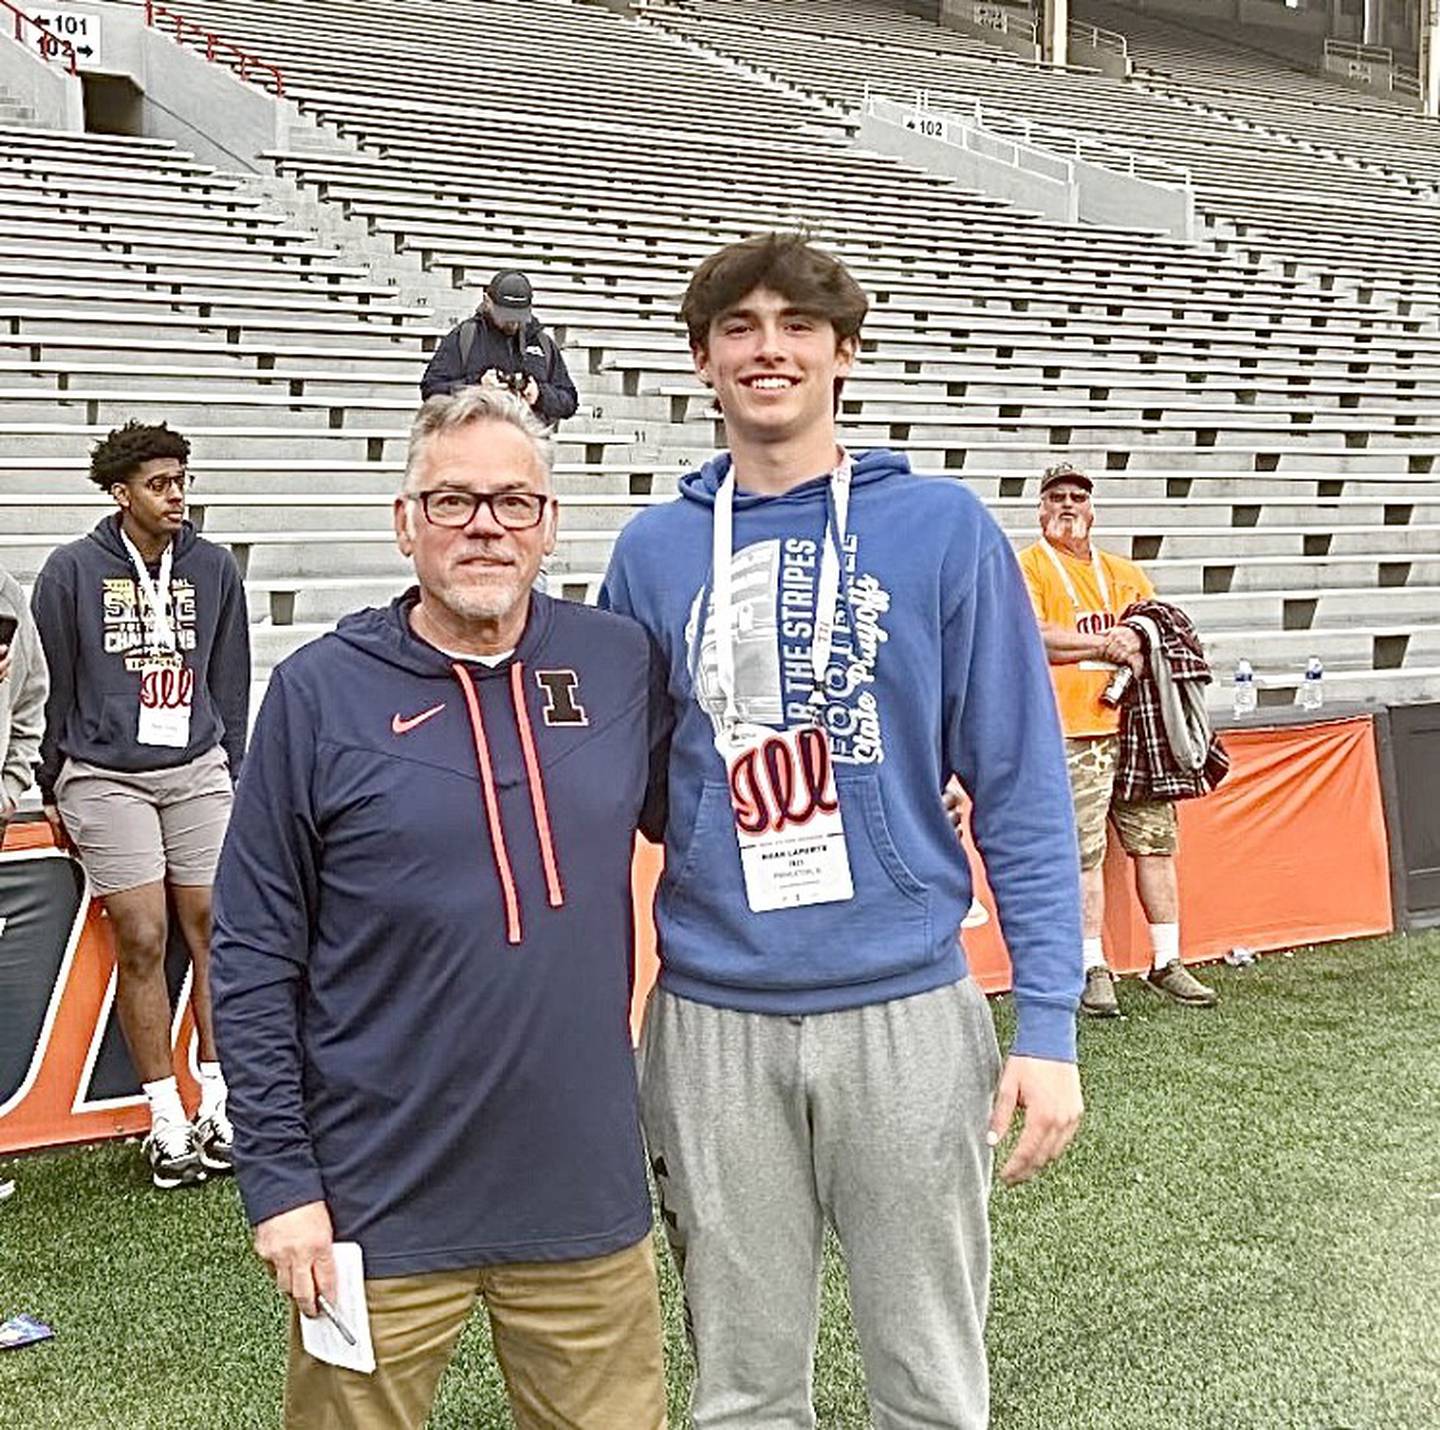 Princeton High School sophomore Noah LaPorte was a guest of Pat Ryan (left), the University of Illinois' Director of Illinois High School Relations, at the Fighting Illini's spring game.